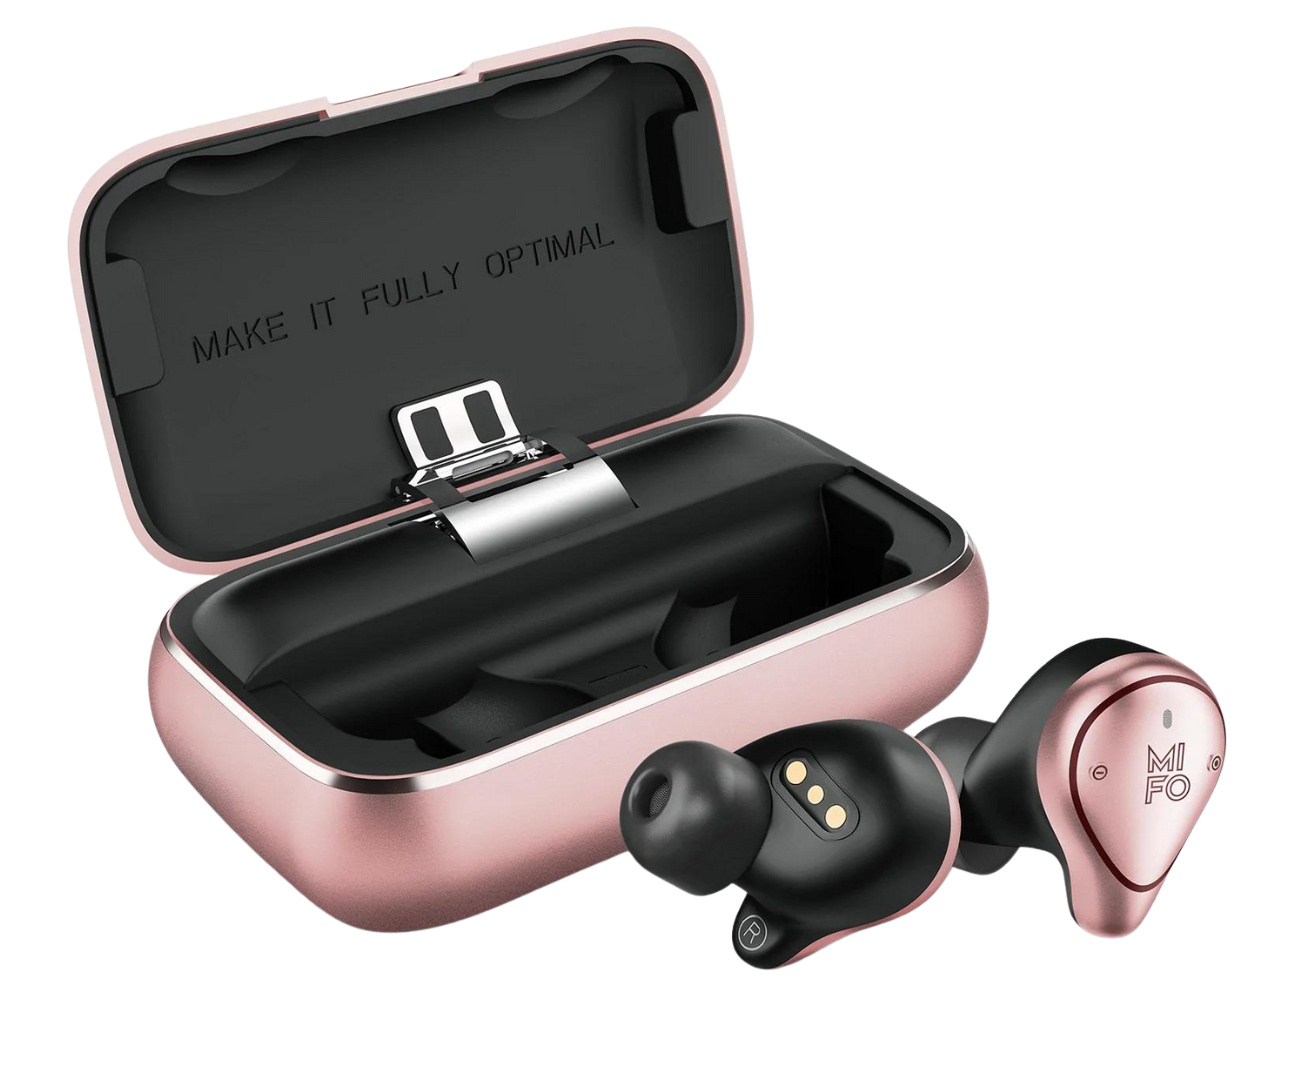 Rose Gold Mifo O5 Plus Earbuds - Smart Wireless Earbuds